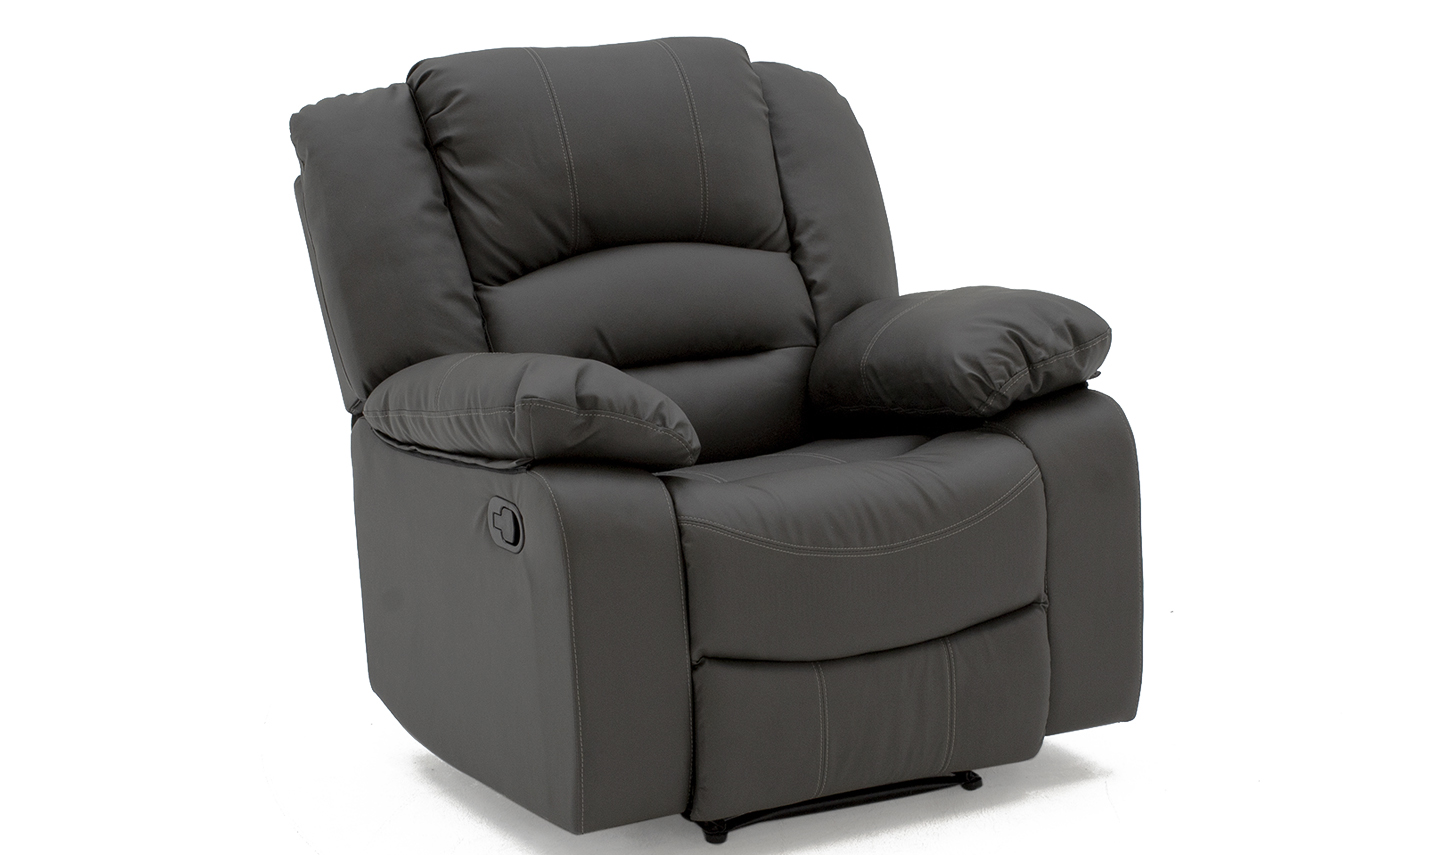 Barletto Grey 1 Seater Recliner Chair